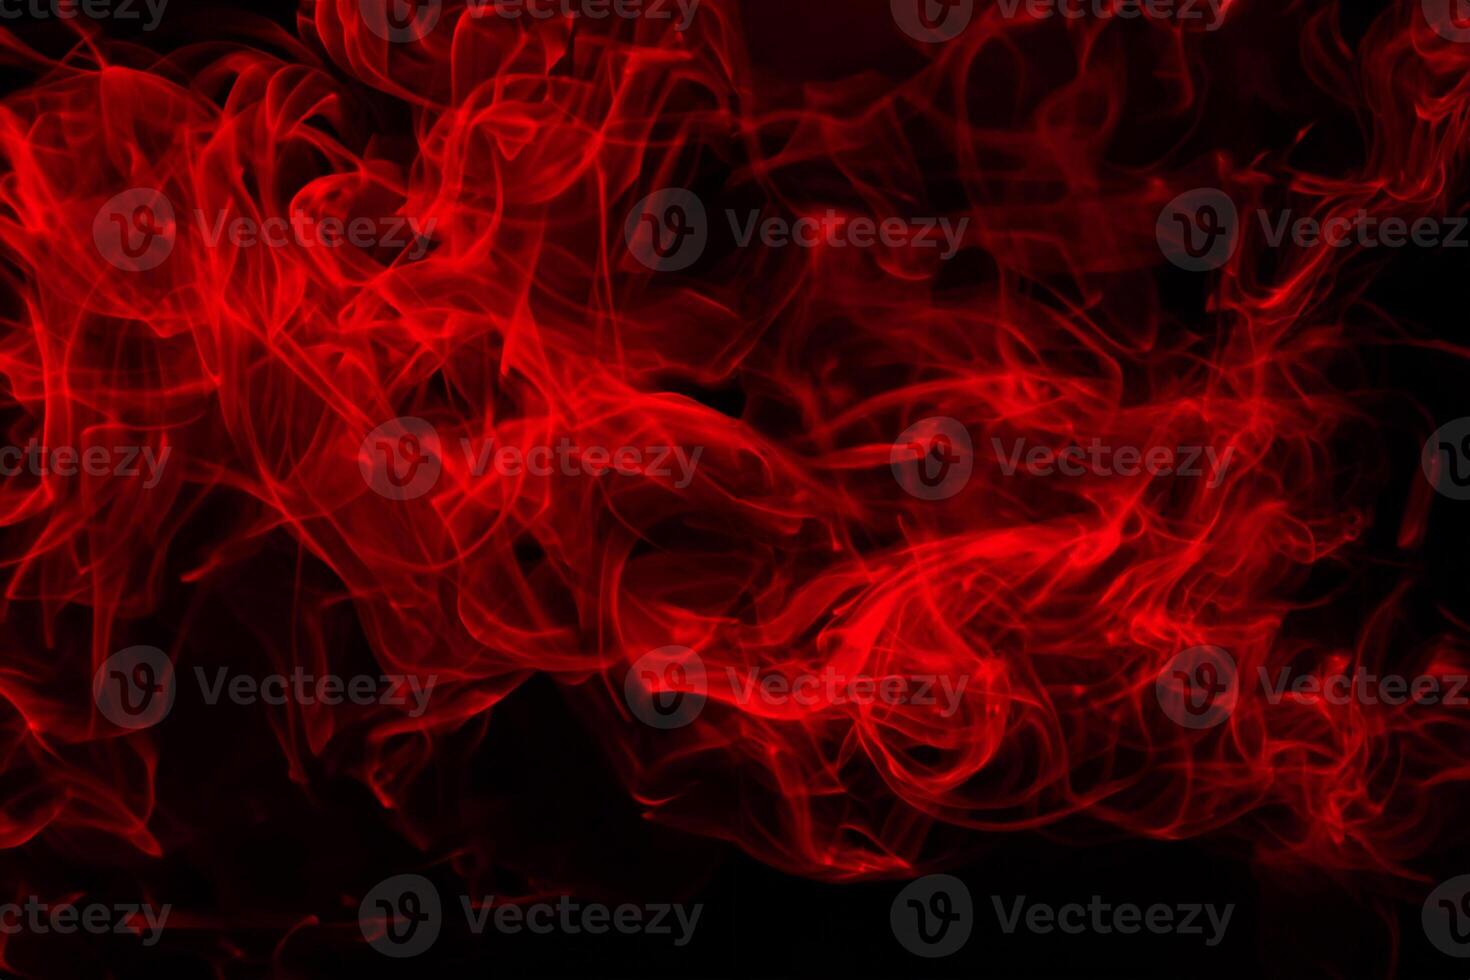 Fluffy Puffs of Smoke and Fog on Black Background, fire design and darkness concept photo